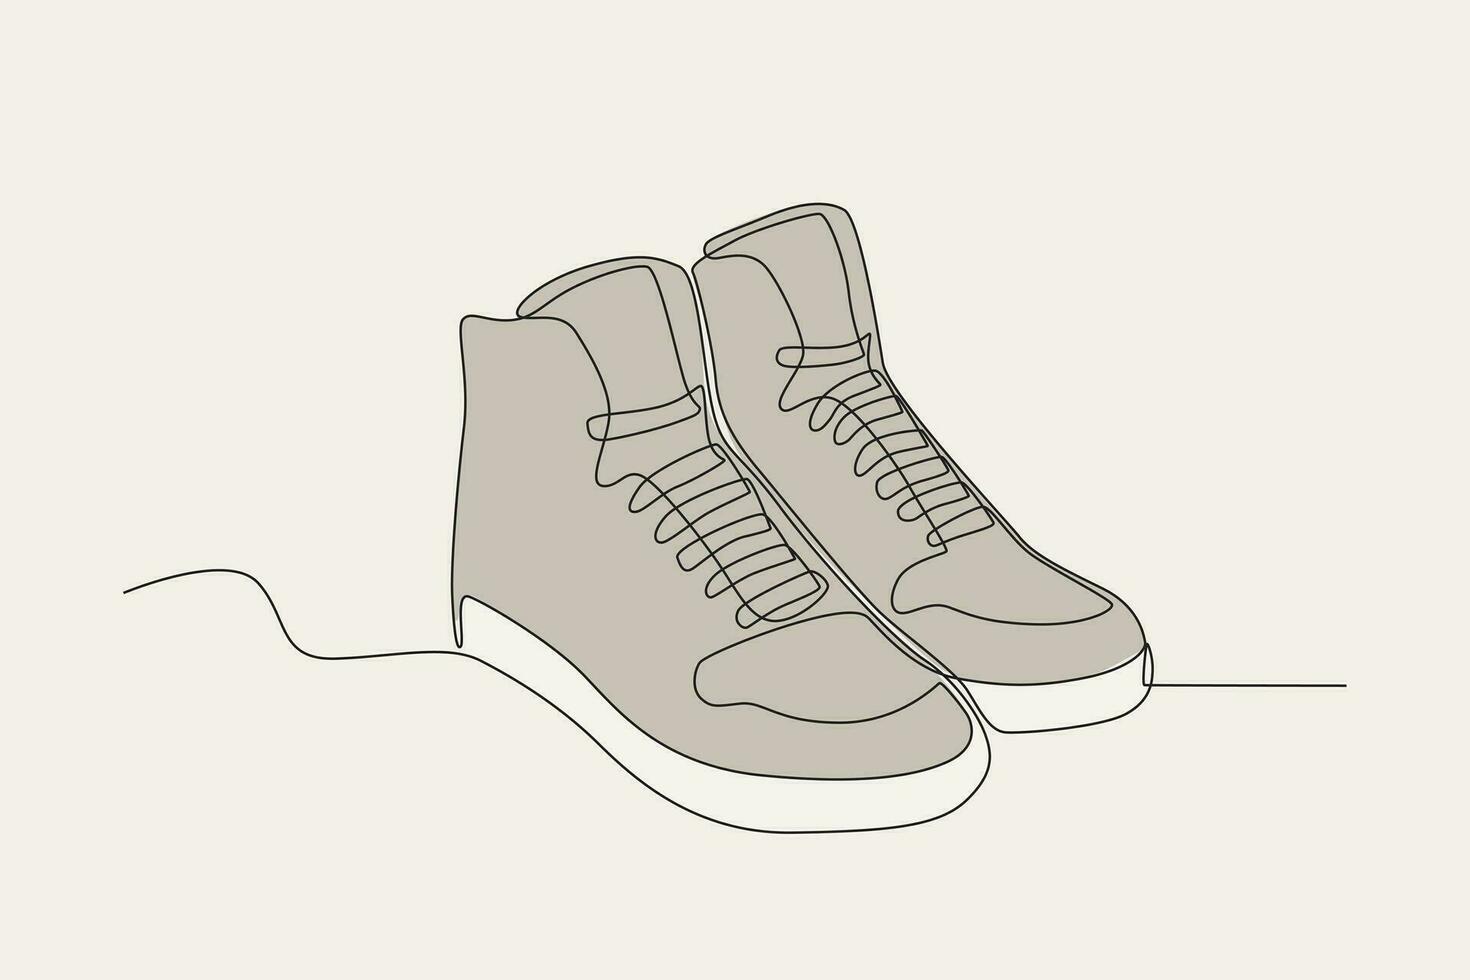 Color illustration of a pair of men's shoes vector